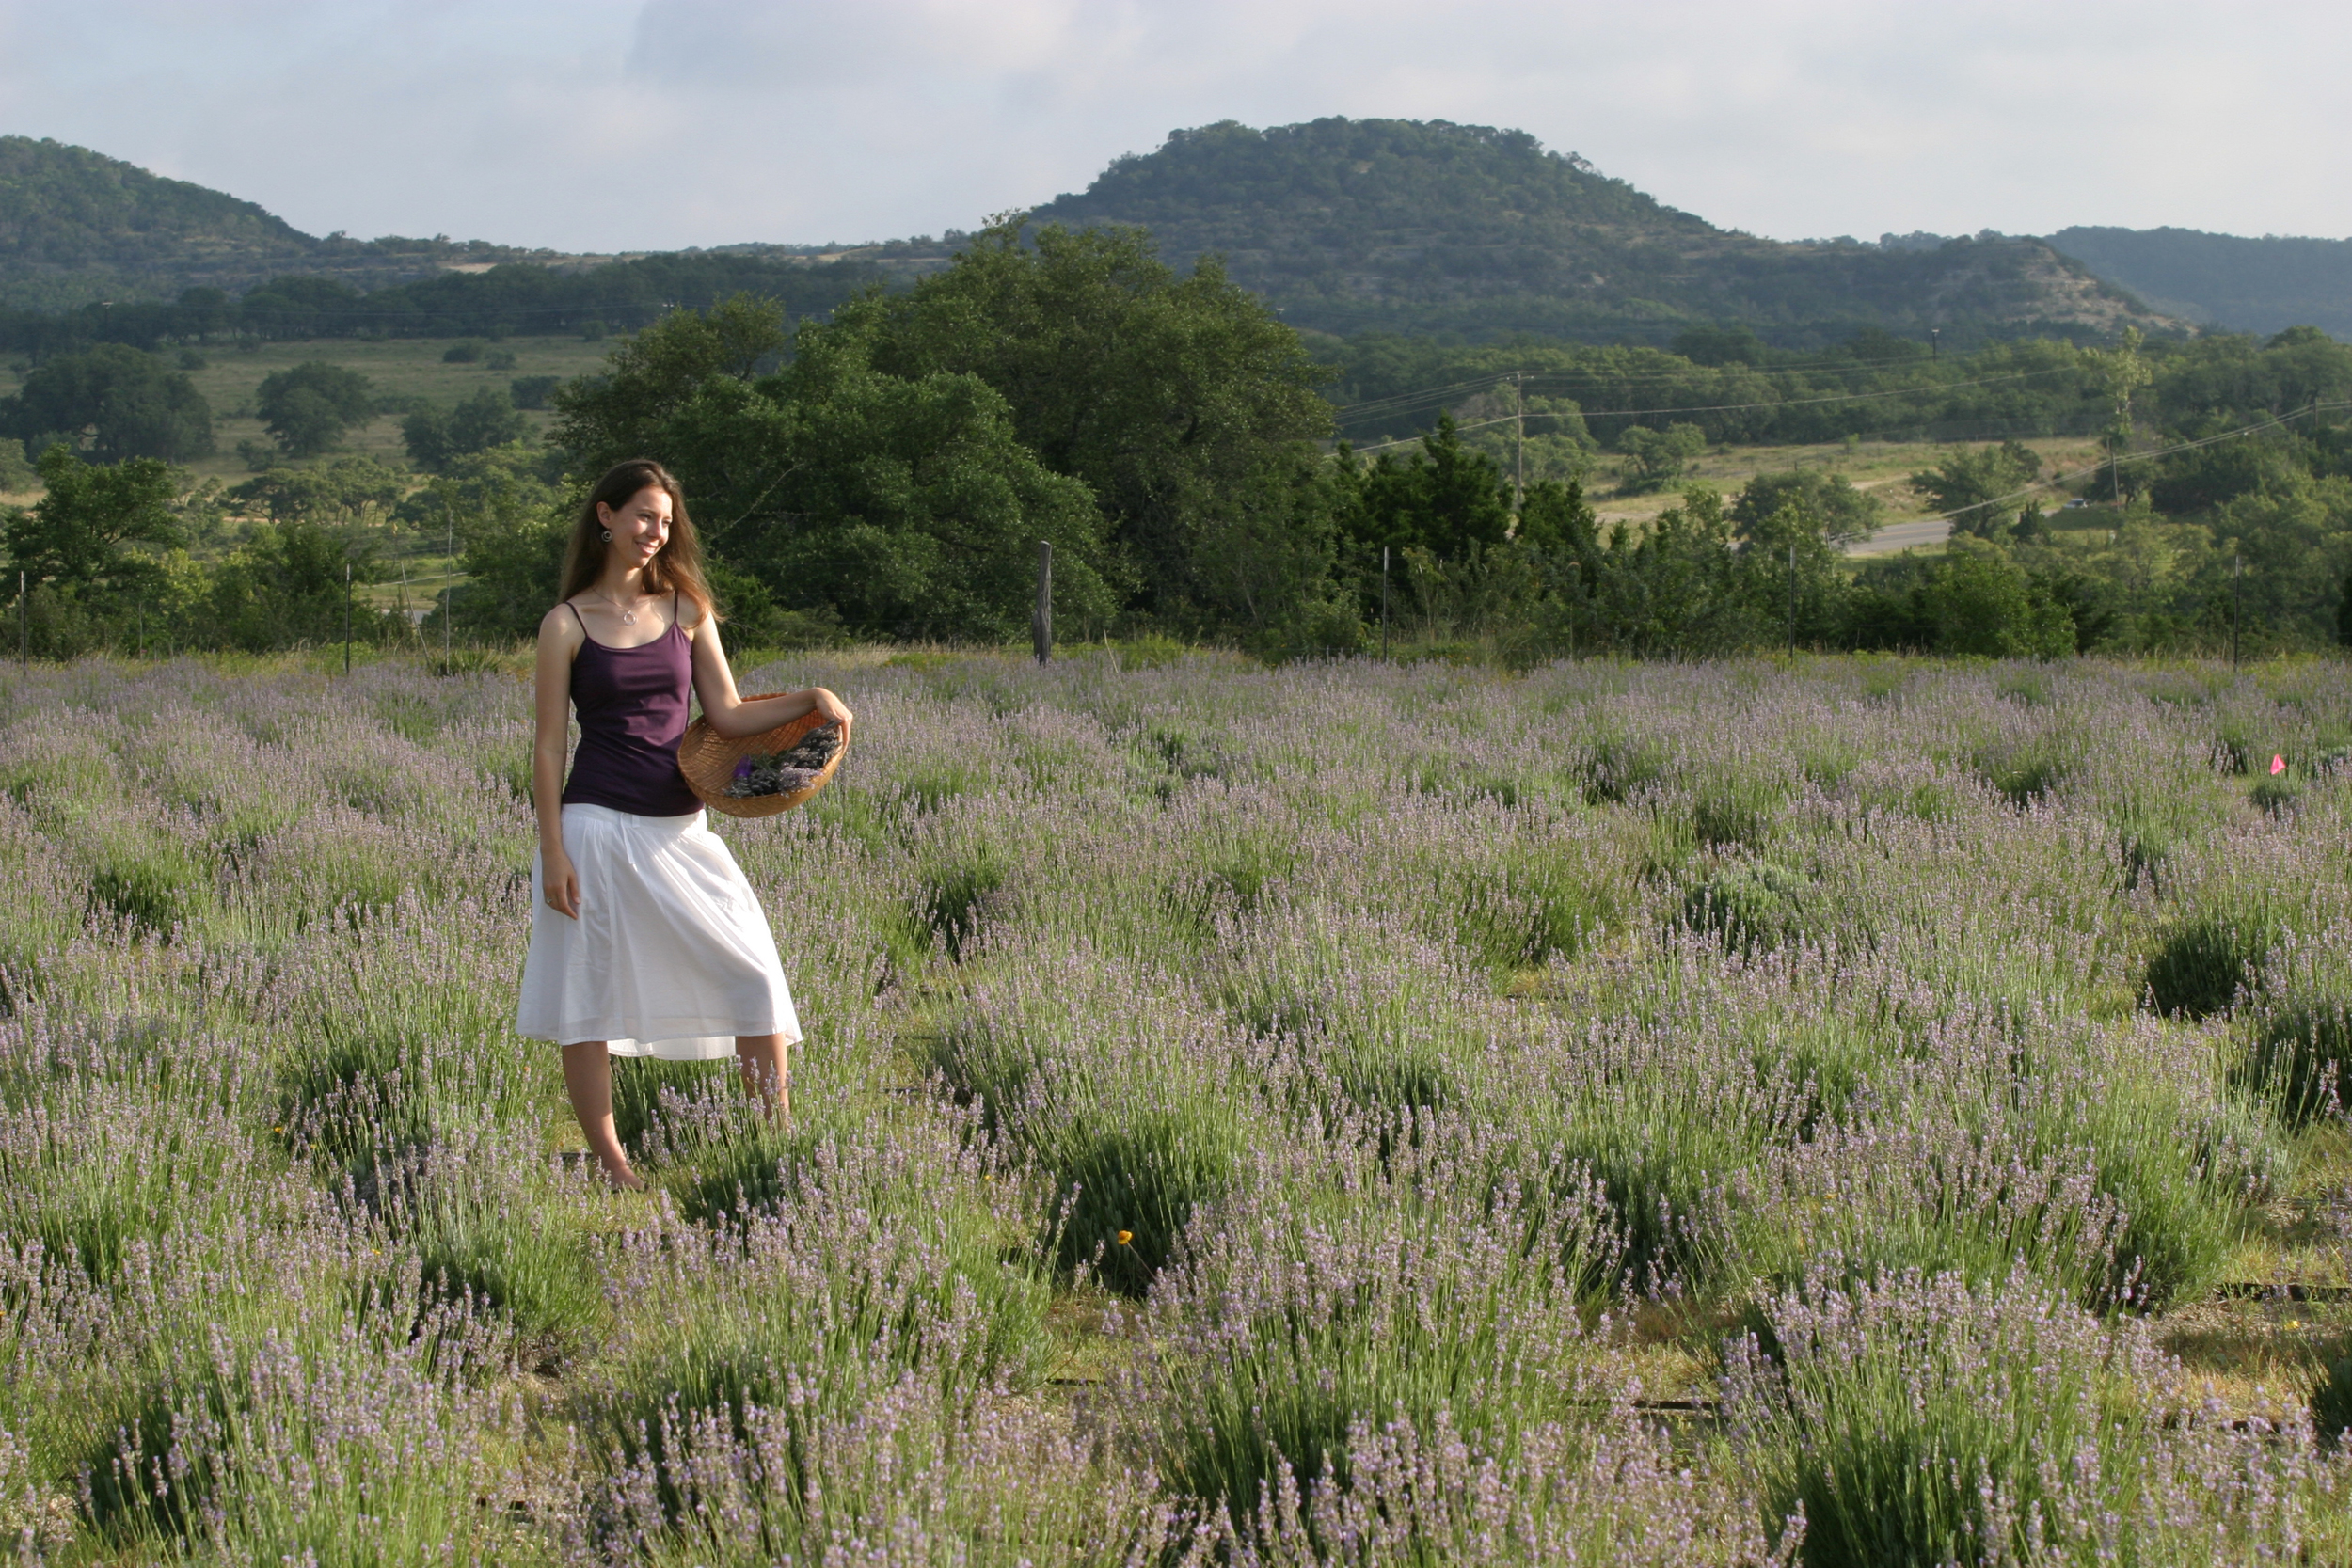 Secrets to Growing Lavender in the Texas Hill Country - Travisso Blog